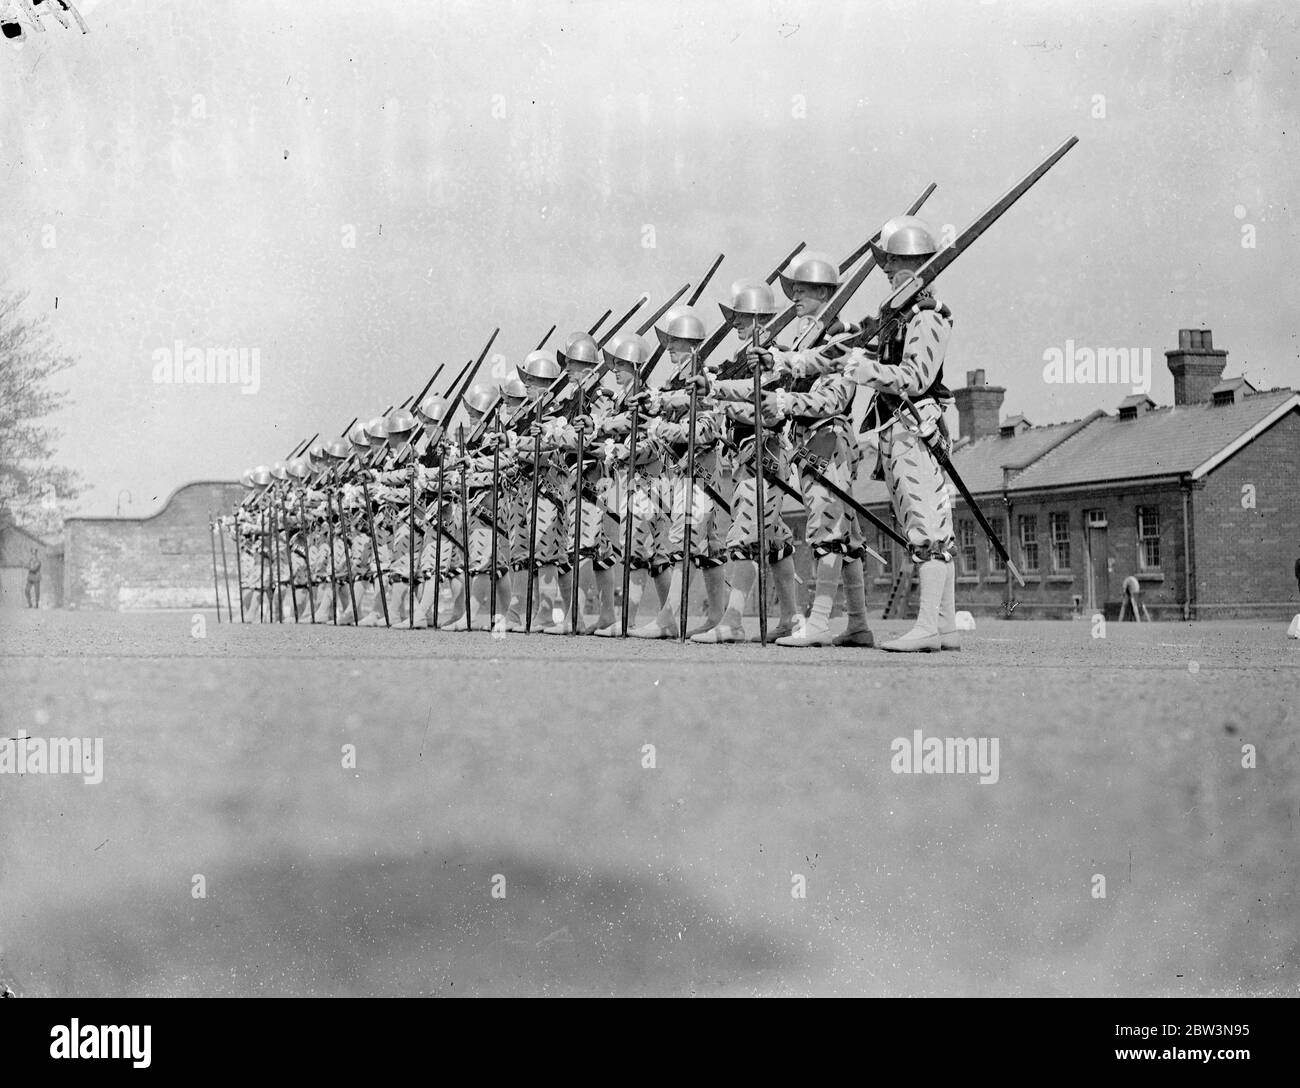 Norfolk regiment ' Musketeers ' rehearse for Royal Tournament . The 2nd Battalion , the Royal Norfolk Regiment , held a full rehearsal at Aldershot for the pageant which will be a feature of the Royal Tournament at Olympia . Photo shows , ' Musketeers ' of the Elizabethan period drilling . 30 April 1936 . Stock Photo